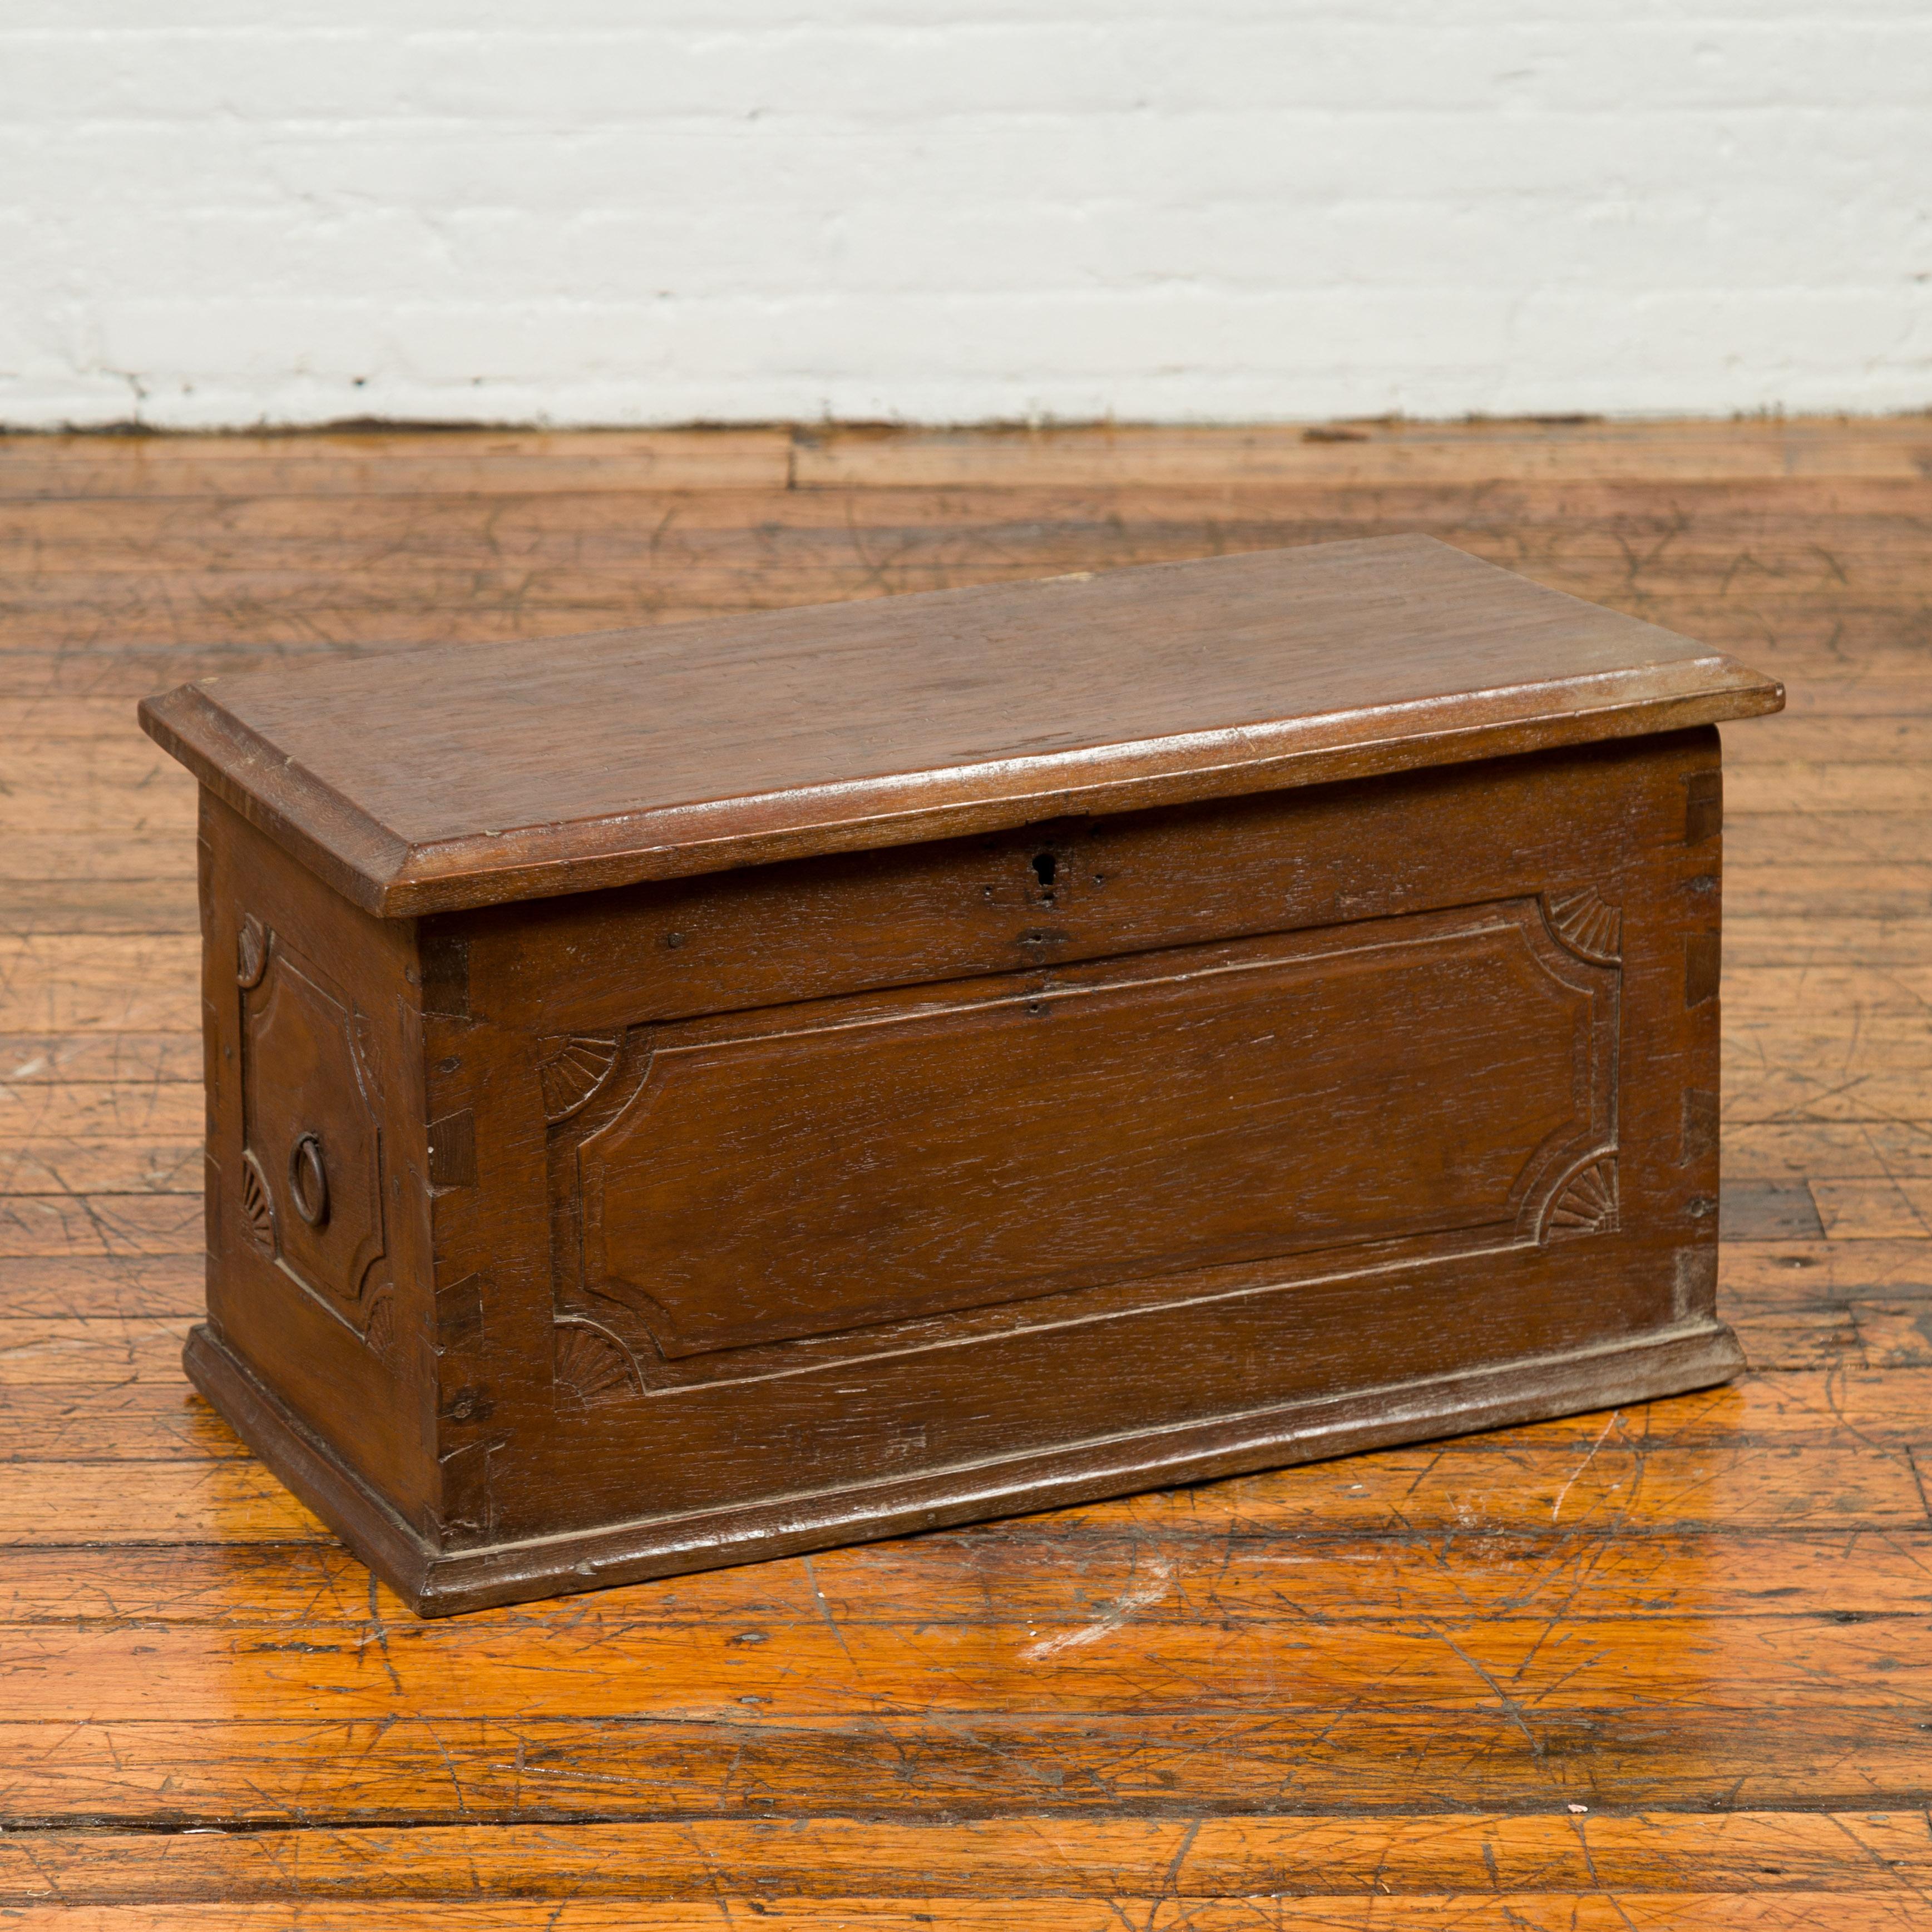 A 19th century Indonesian wooden treasure chest with carved fan motifs, dovetailed construction and lateral handles. Found in Sumatra, this wooden treasure chest features a rectangular lid with beveled edges, opening to reveal a storage space with